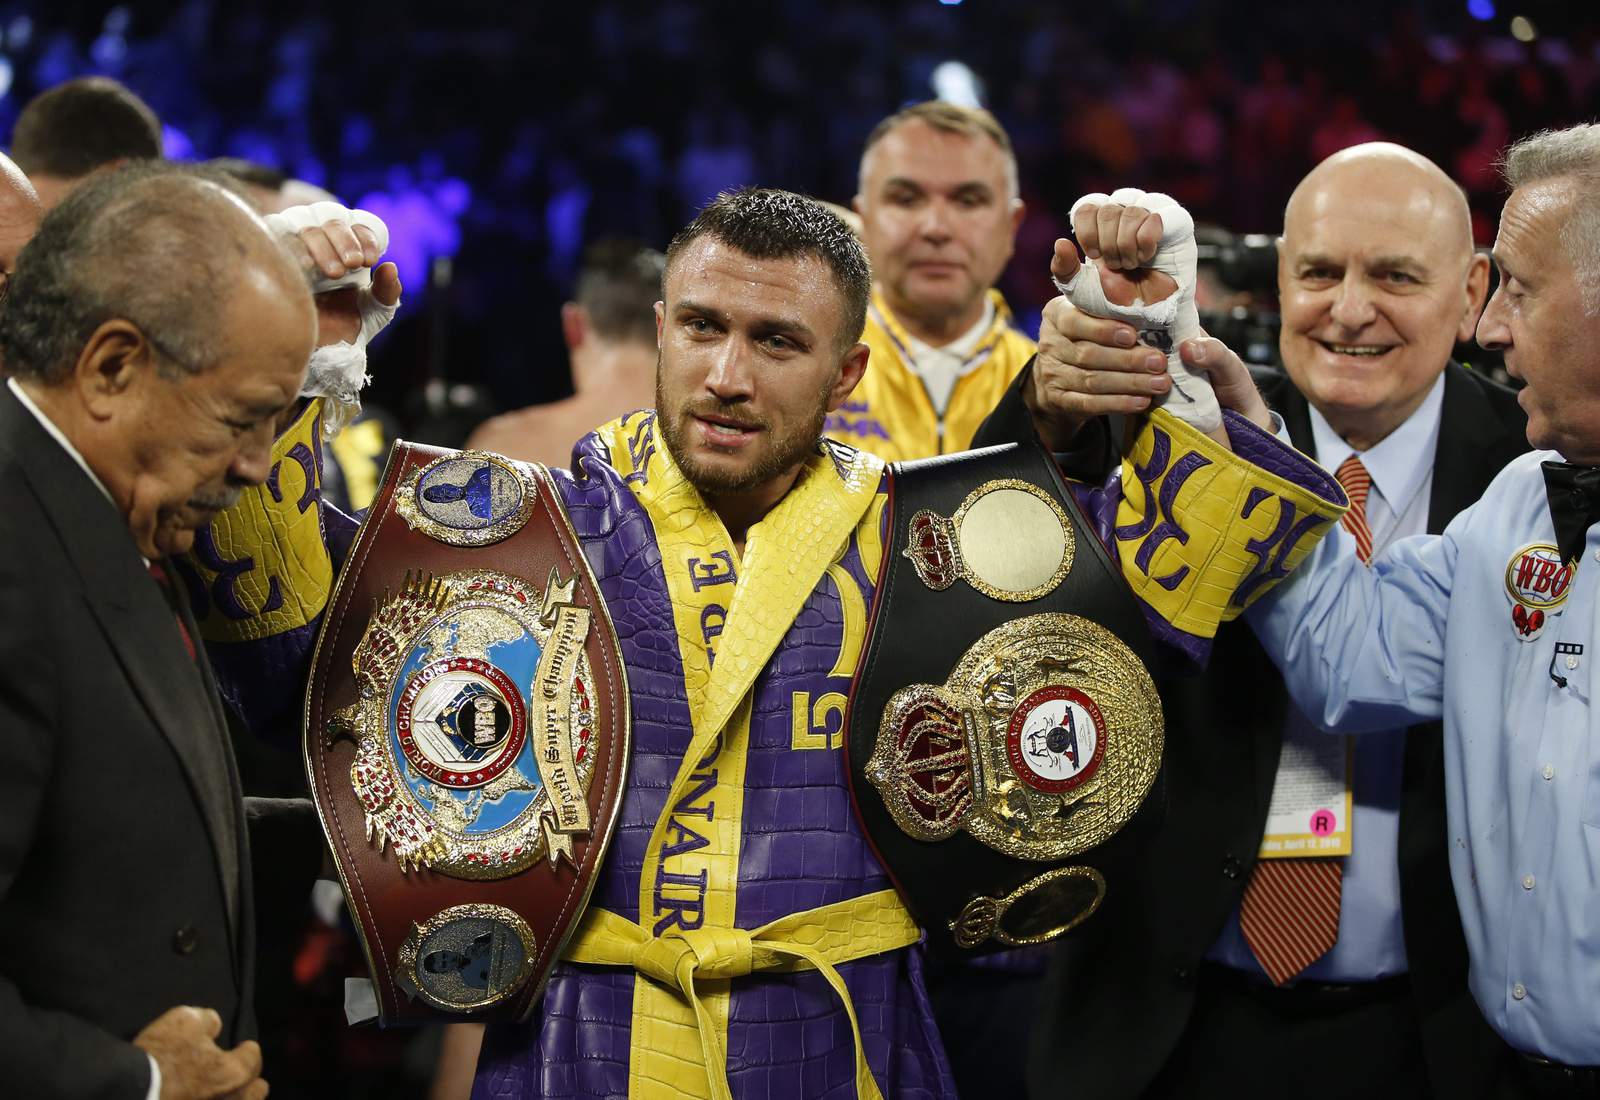 Lomachenko, Lopez to give boxing fans a gift: free fight